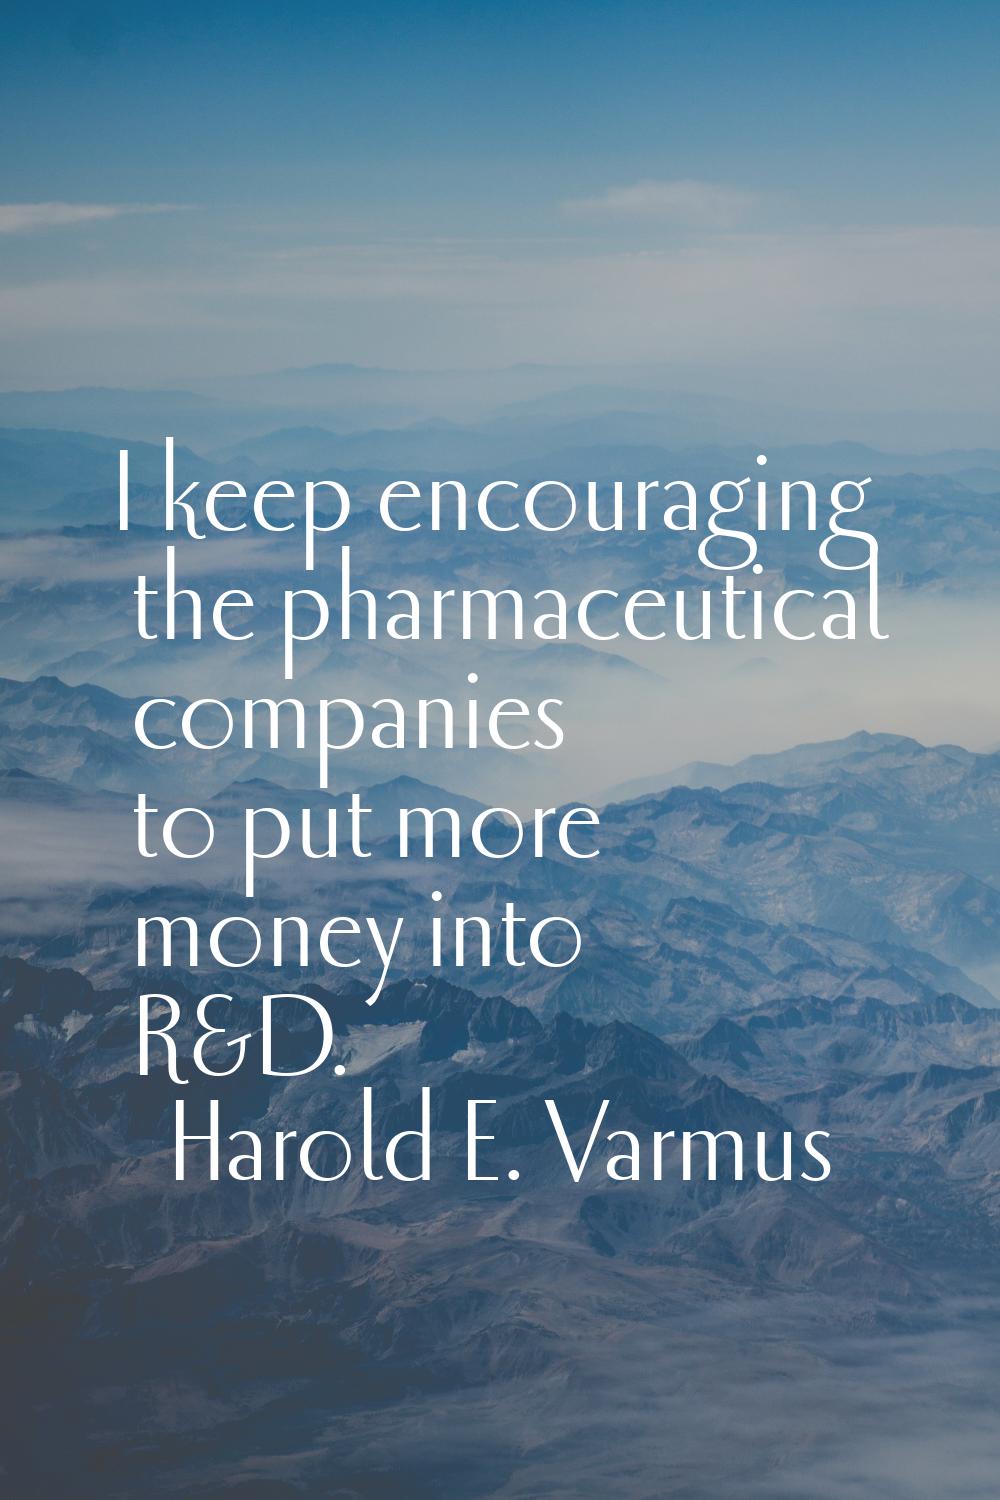 I keep encouraging the pharmaceutical companies to put more money into R&D.